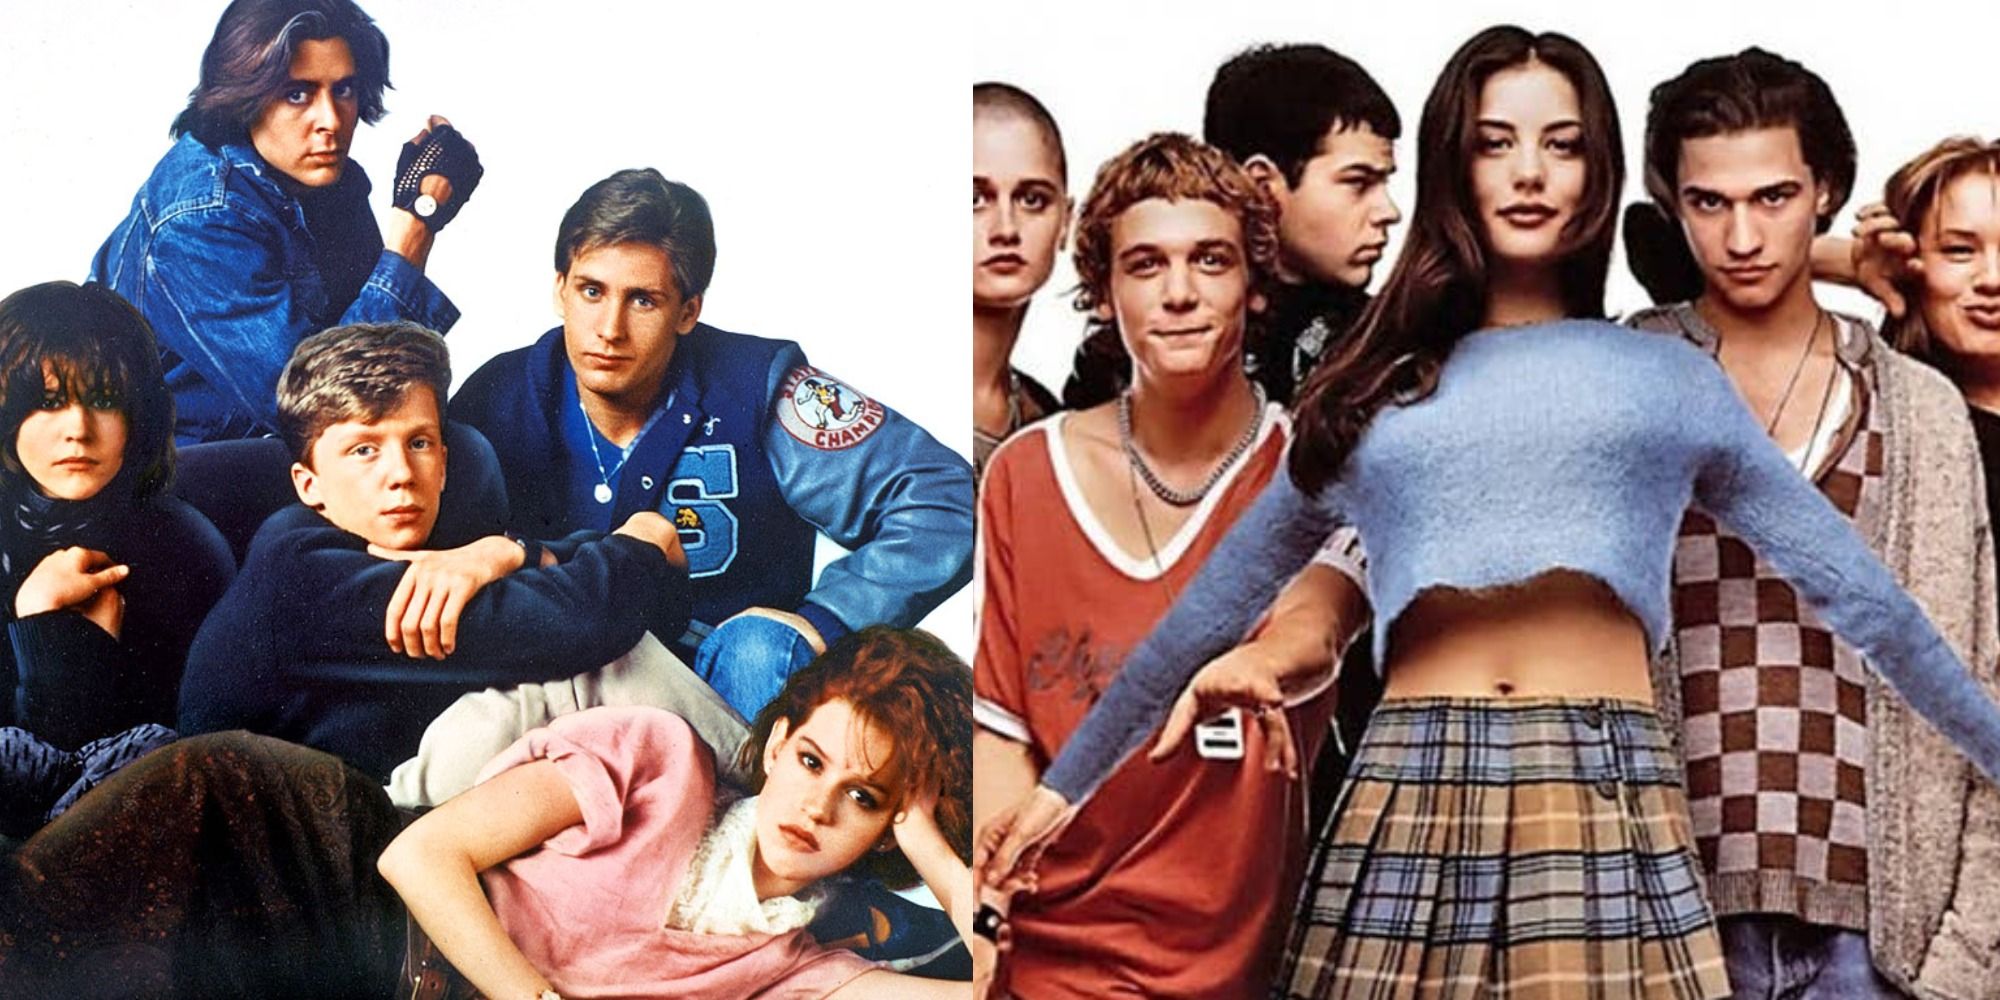 Two side by side images of the cast of The Breakfast Club and Empire Records